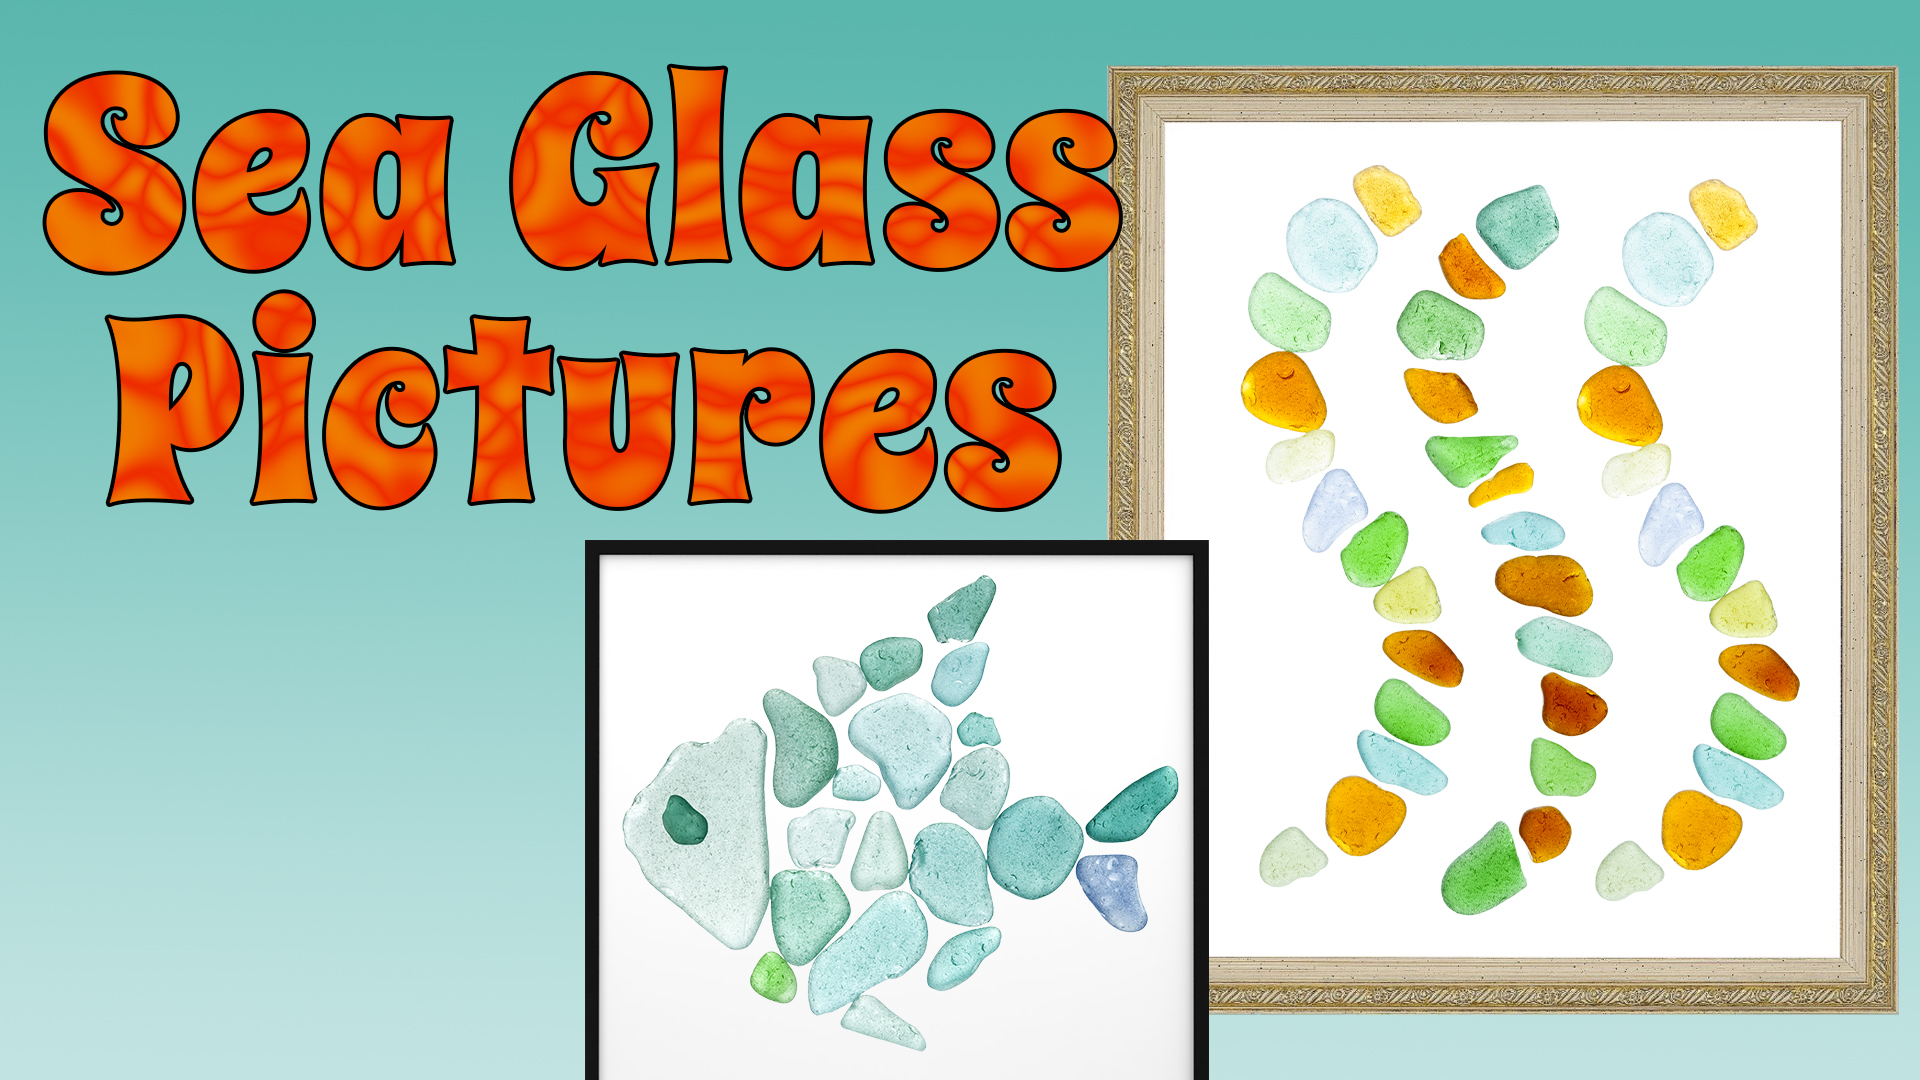 Image reads "Sea Glass Pictures" against a light blue/green background. Two picture frames with sea glass designs are to the right of the title.